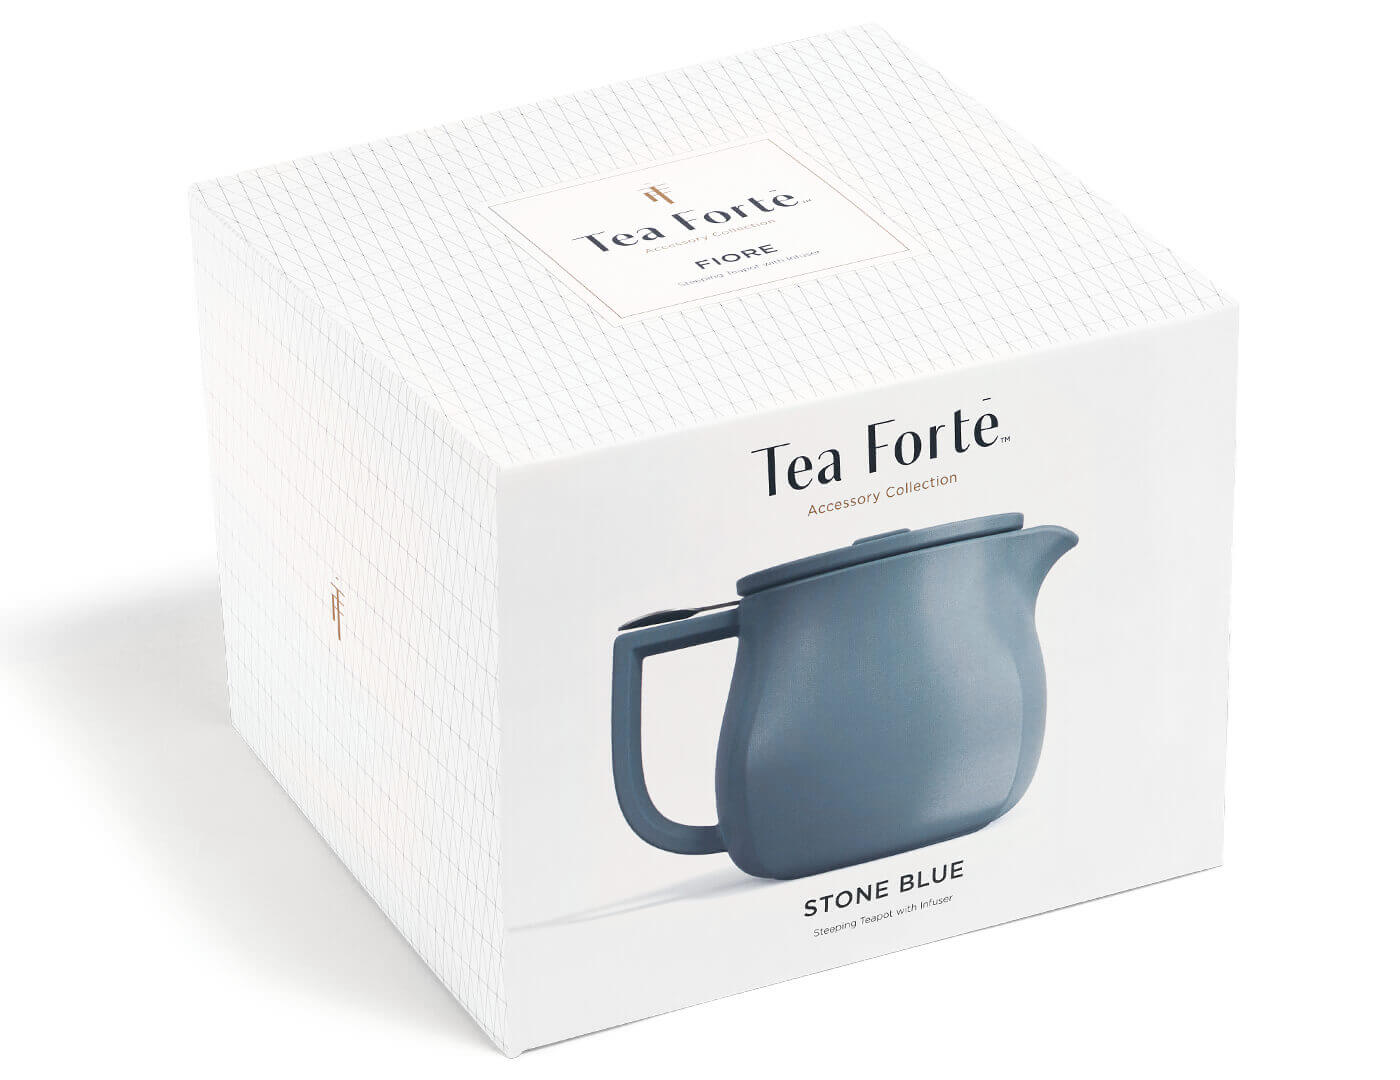 Fiore Stone Blue Teapot box, front side